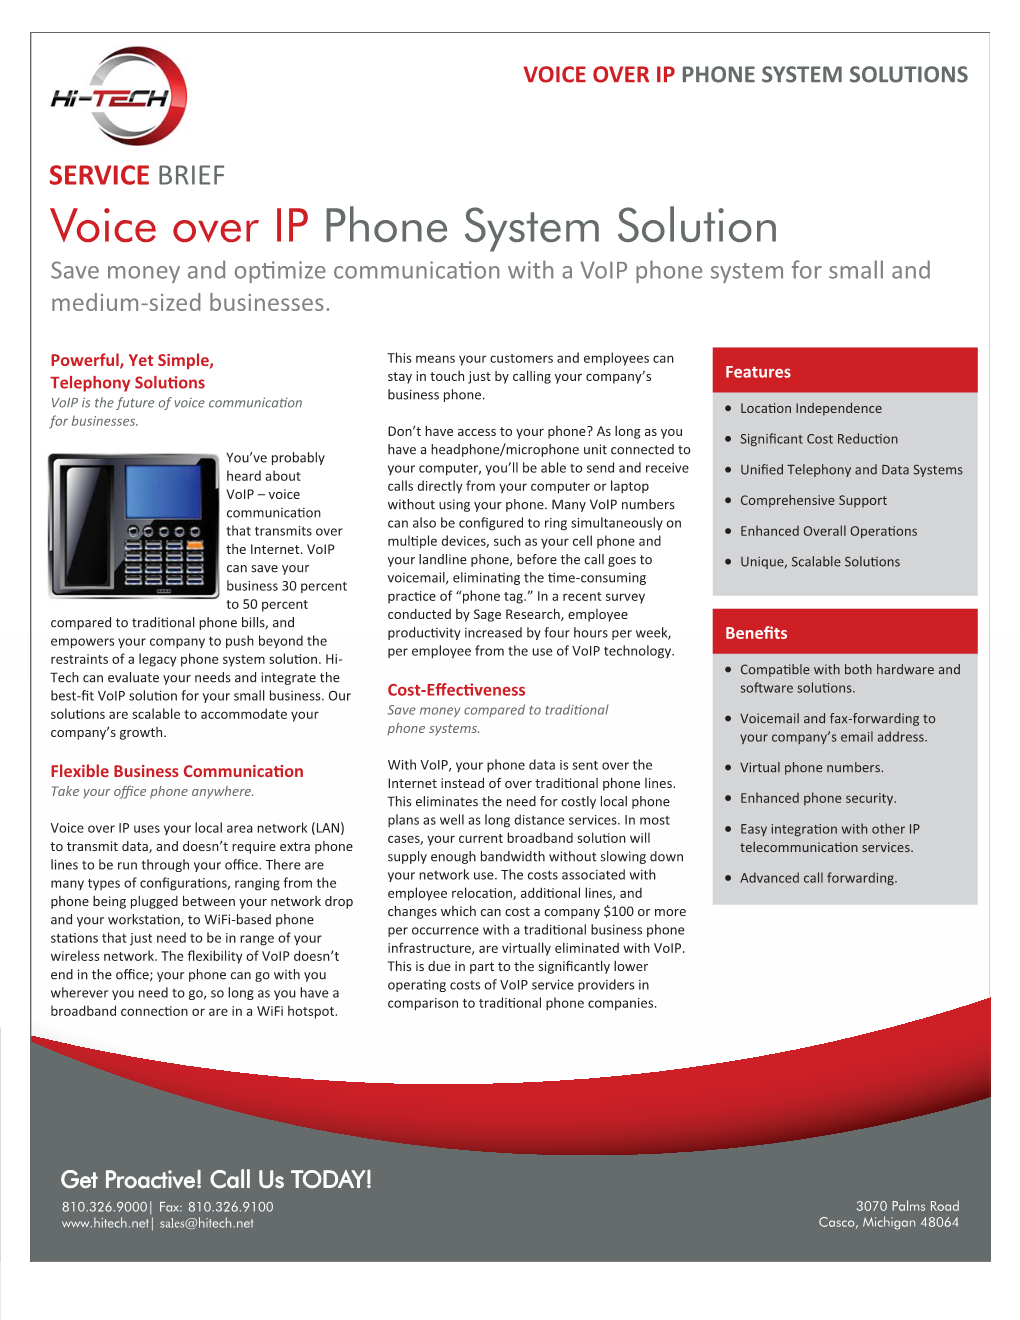 Voice Over Ip Phone System Solutions